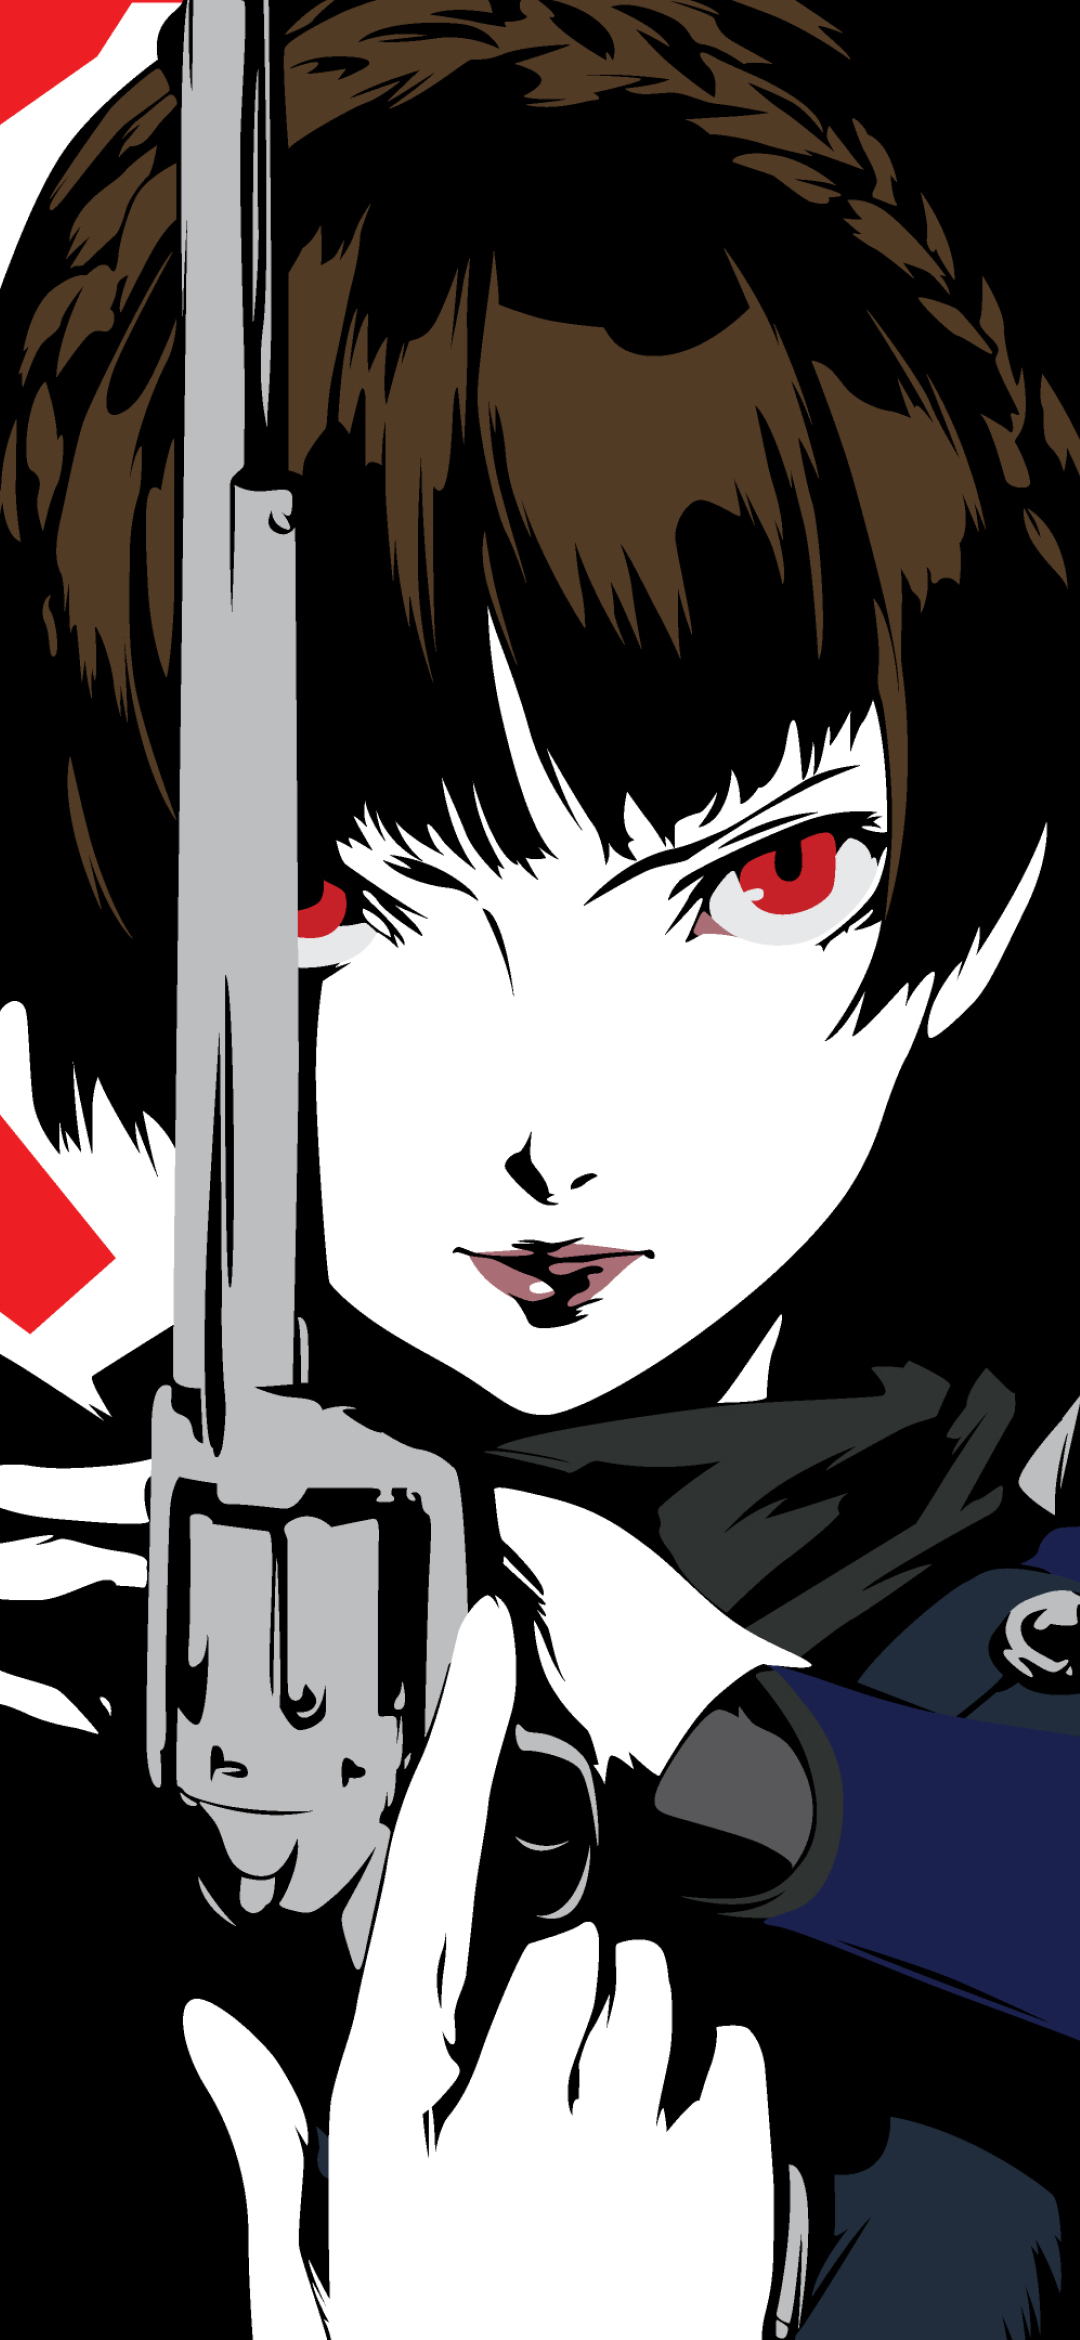 1080x2340 Resolution Queen Persona 5 Anime Girl 4K 1080x2340 Resolution ...